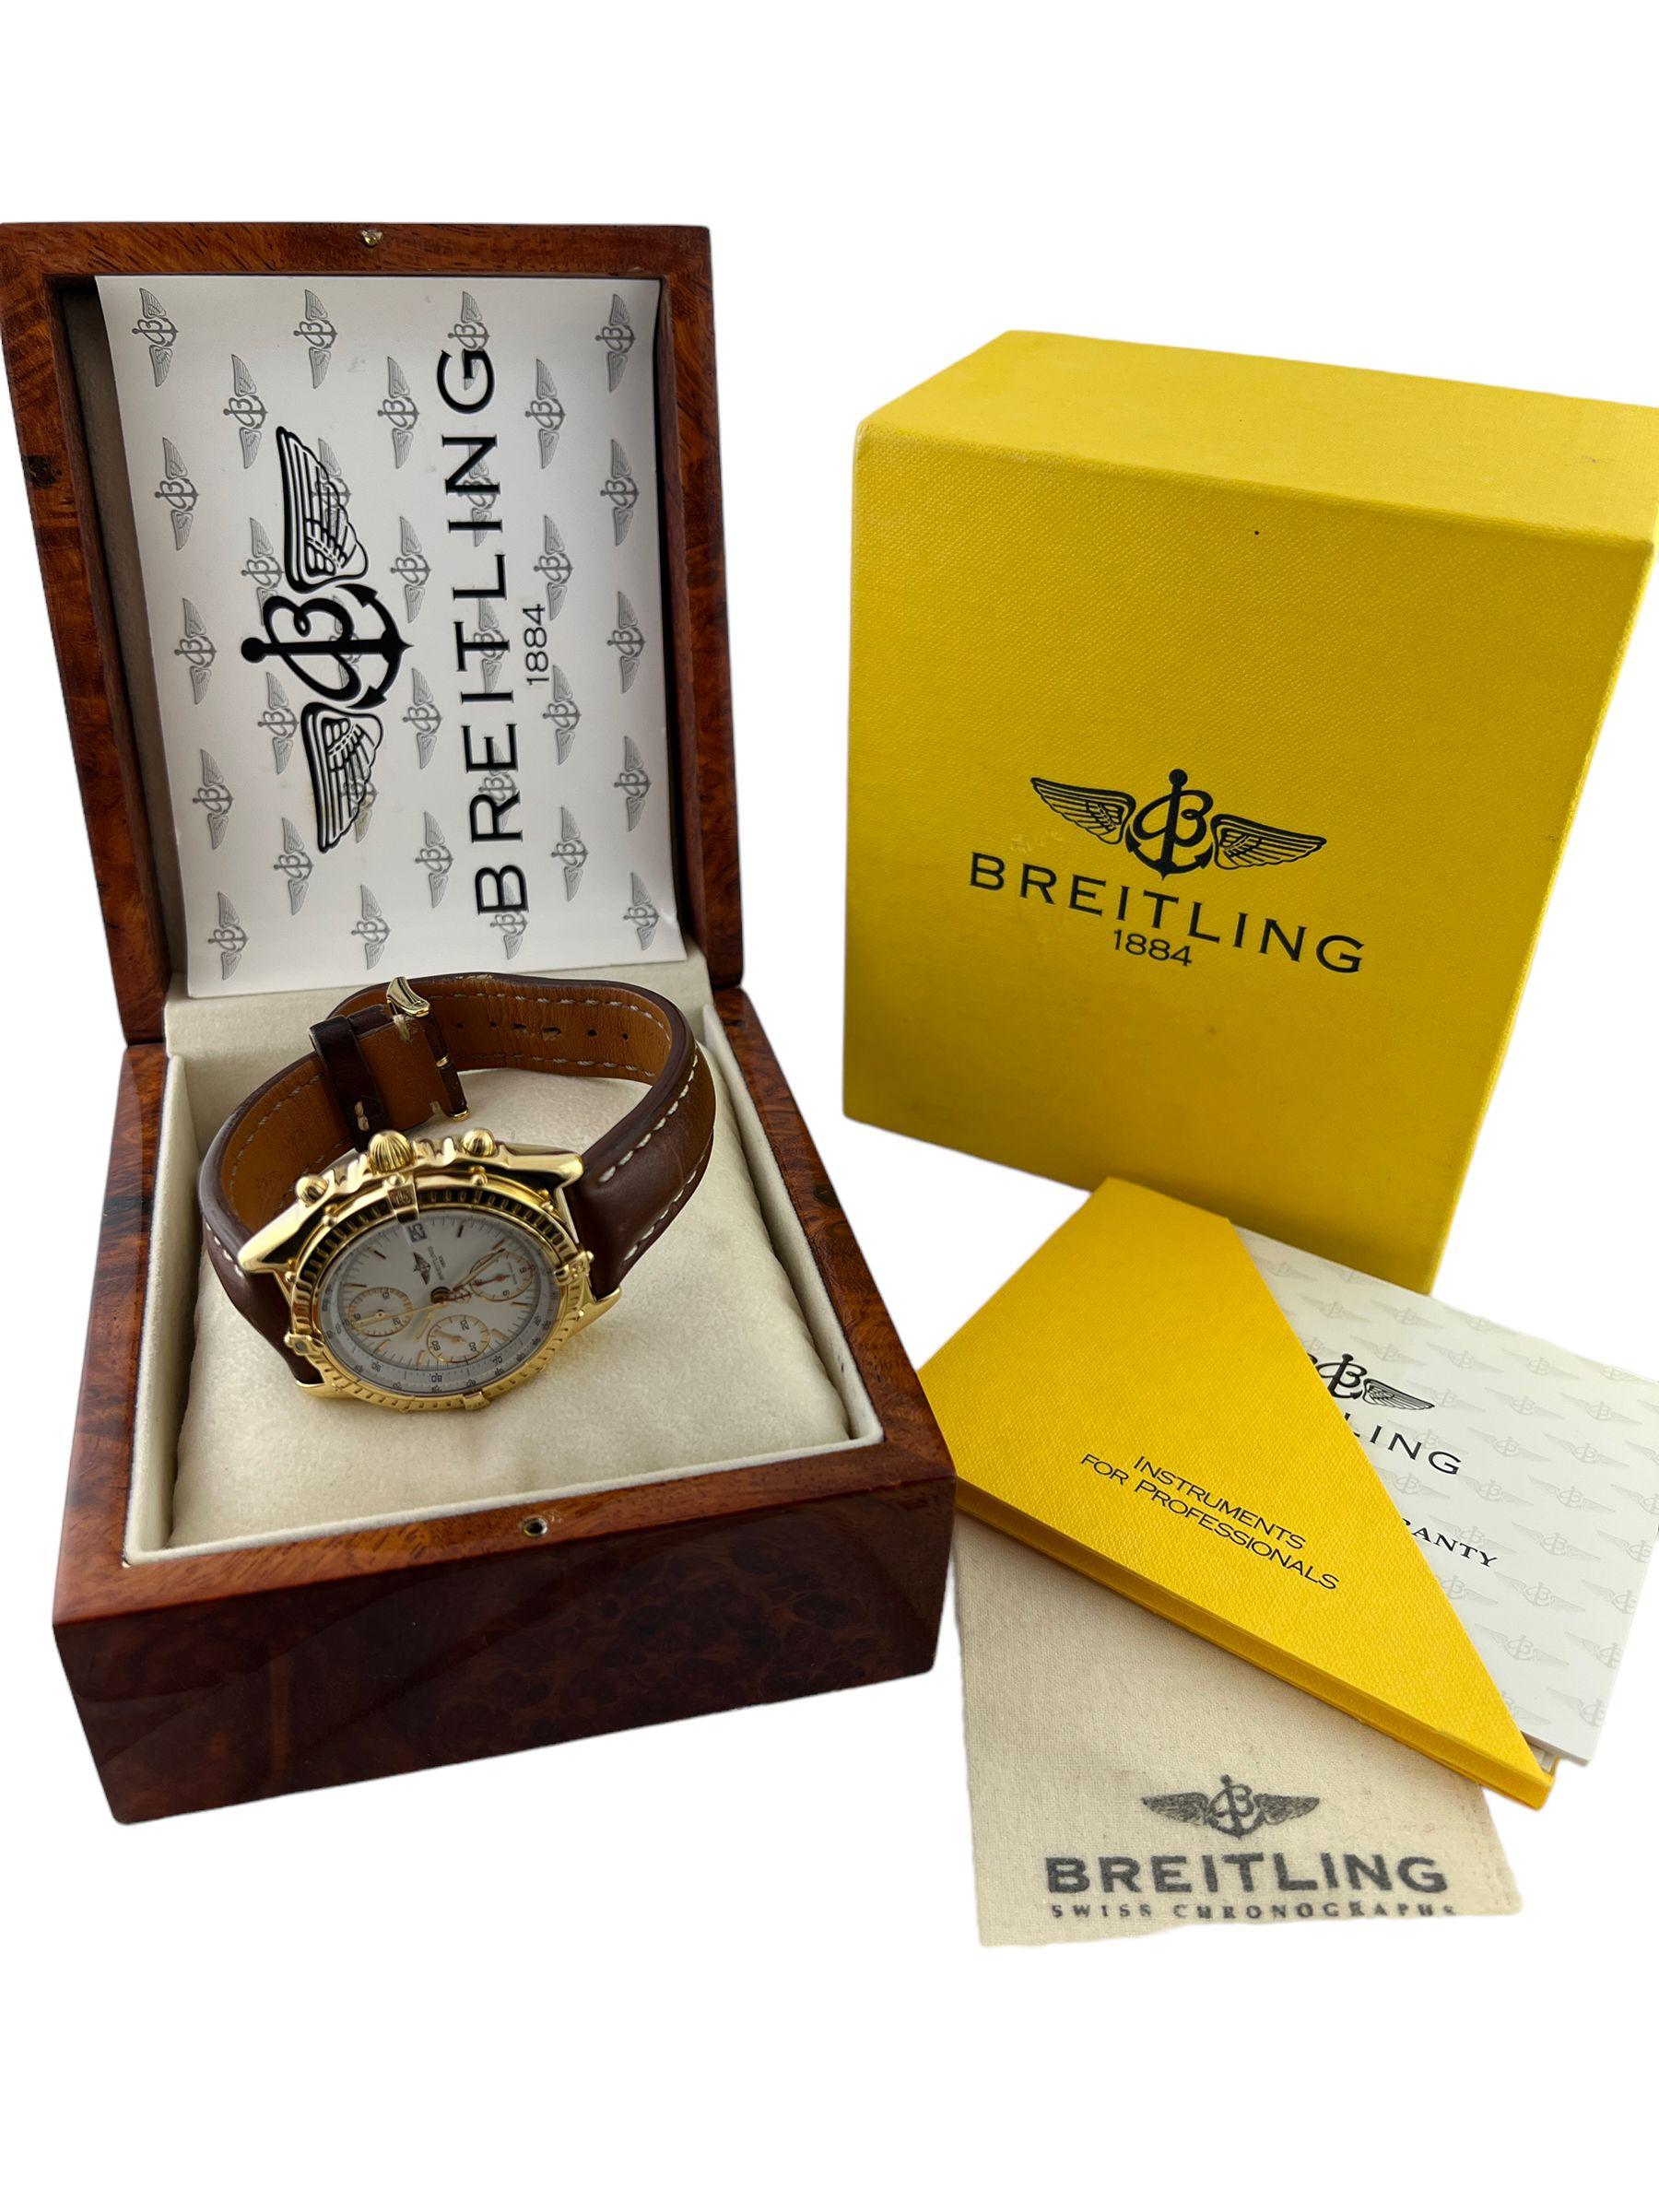 Breitling Chronomat 18k Yellow Gold Men's Watch Leather Band K13047X In Good Condition For Sale In Washington Depot, CT